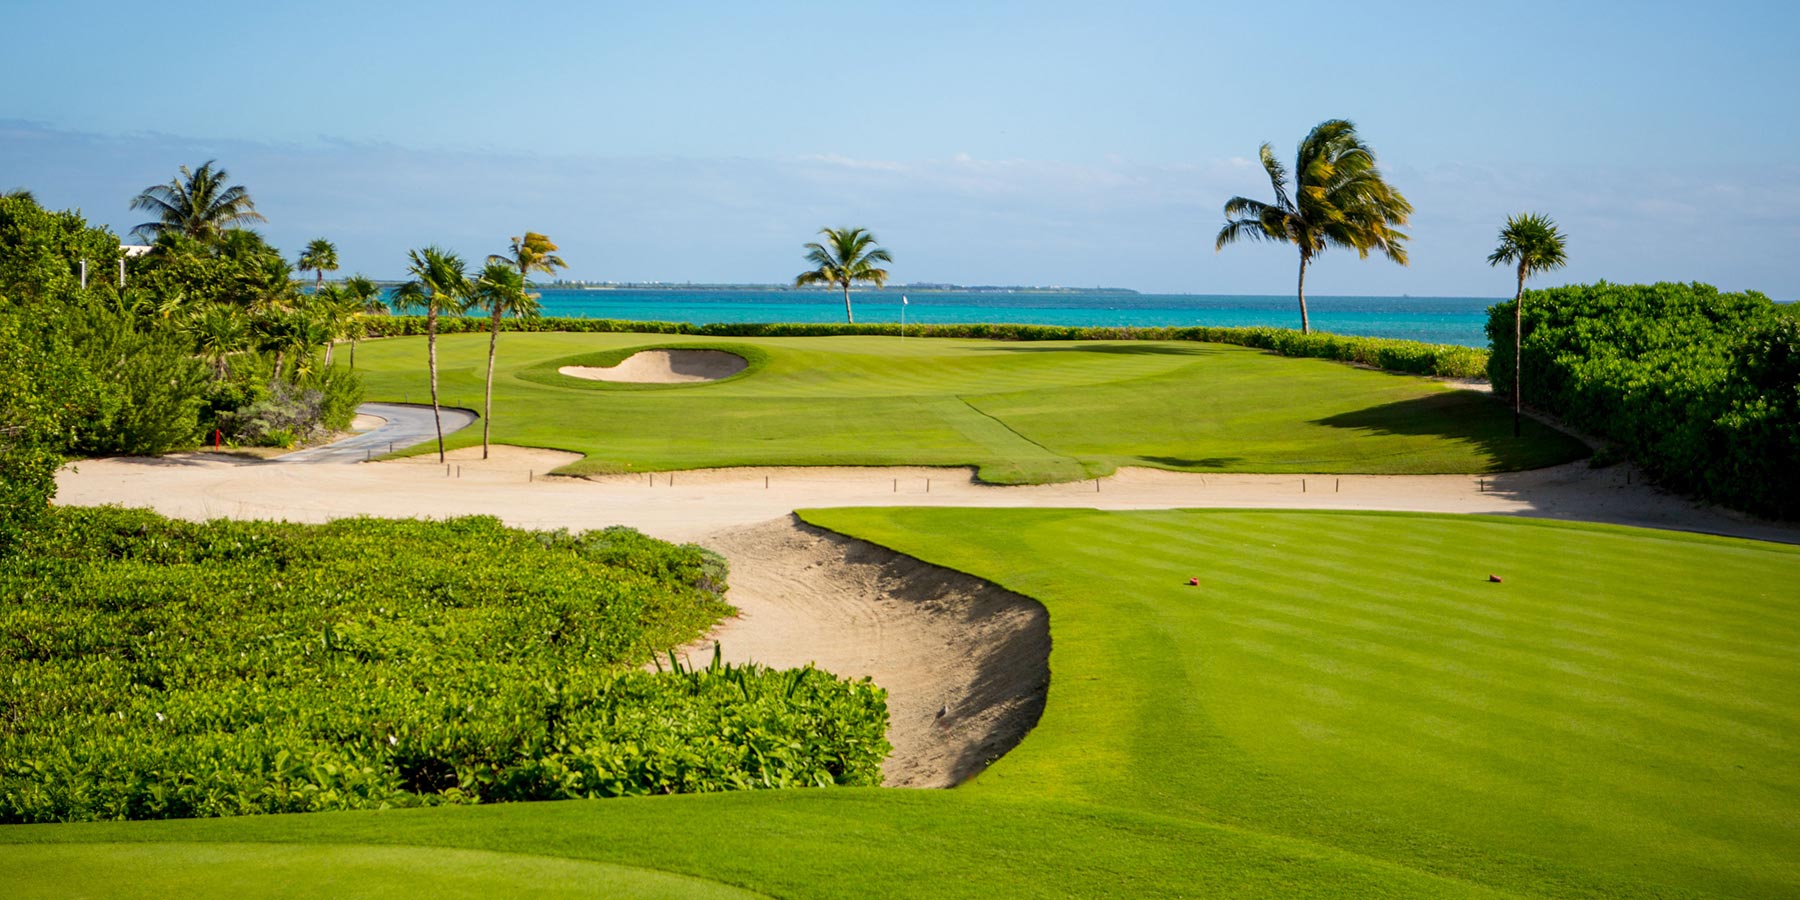 This Tour pro just went full 'Happy Gilmore' on the greens at Mayakoba